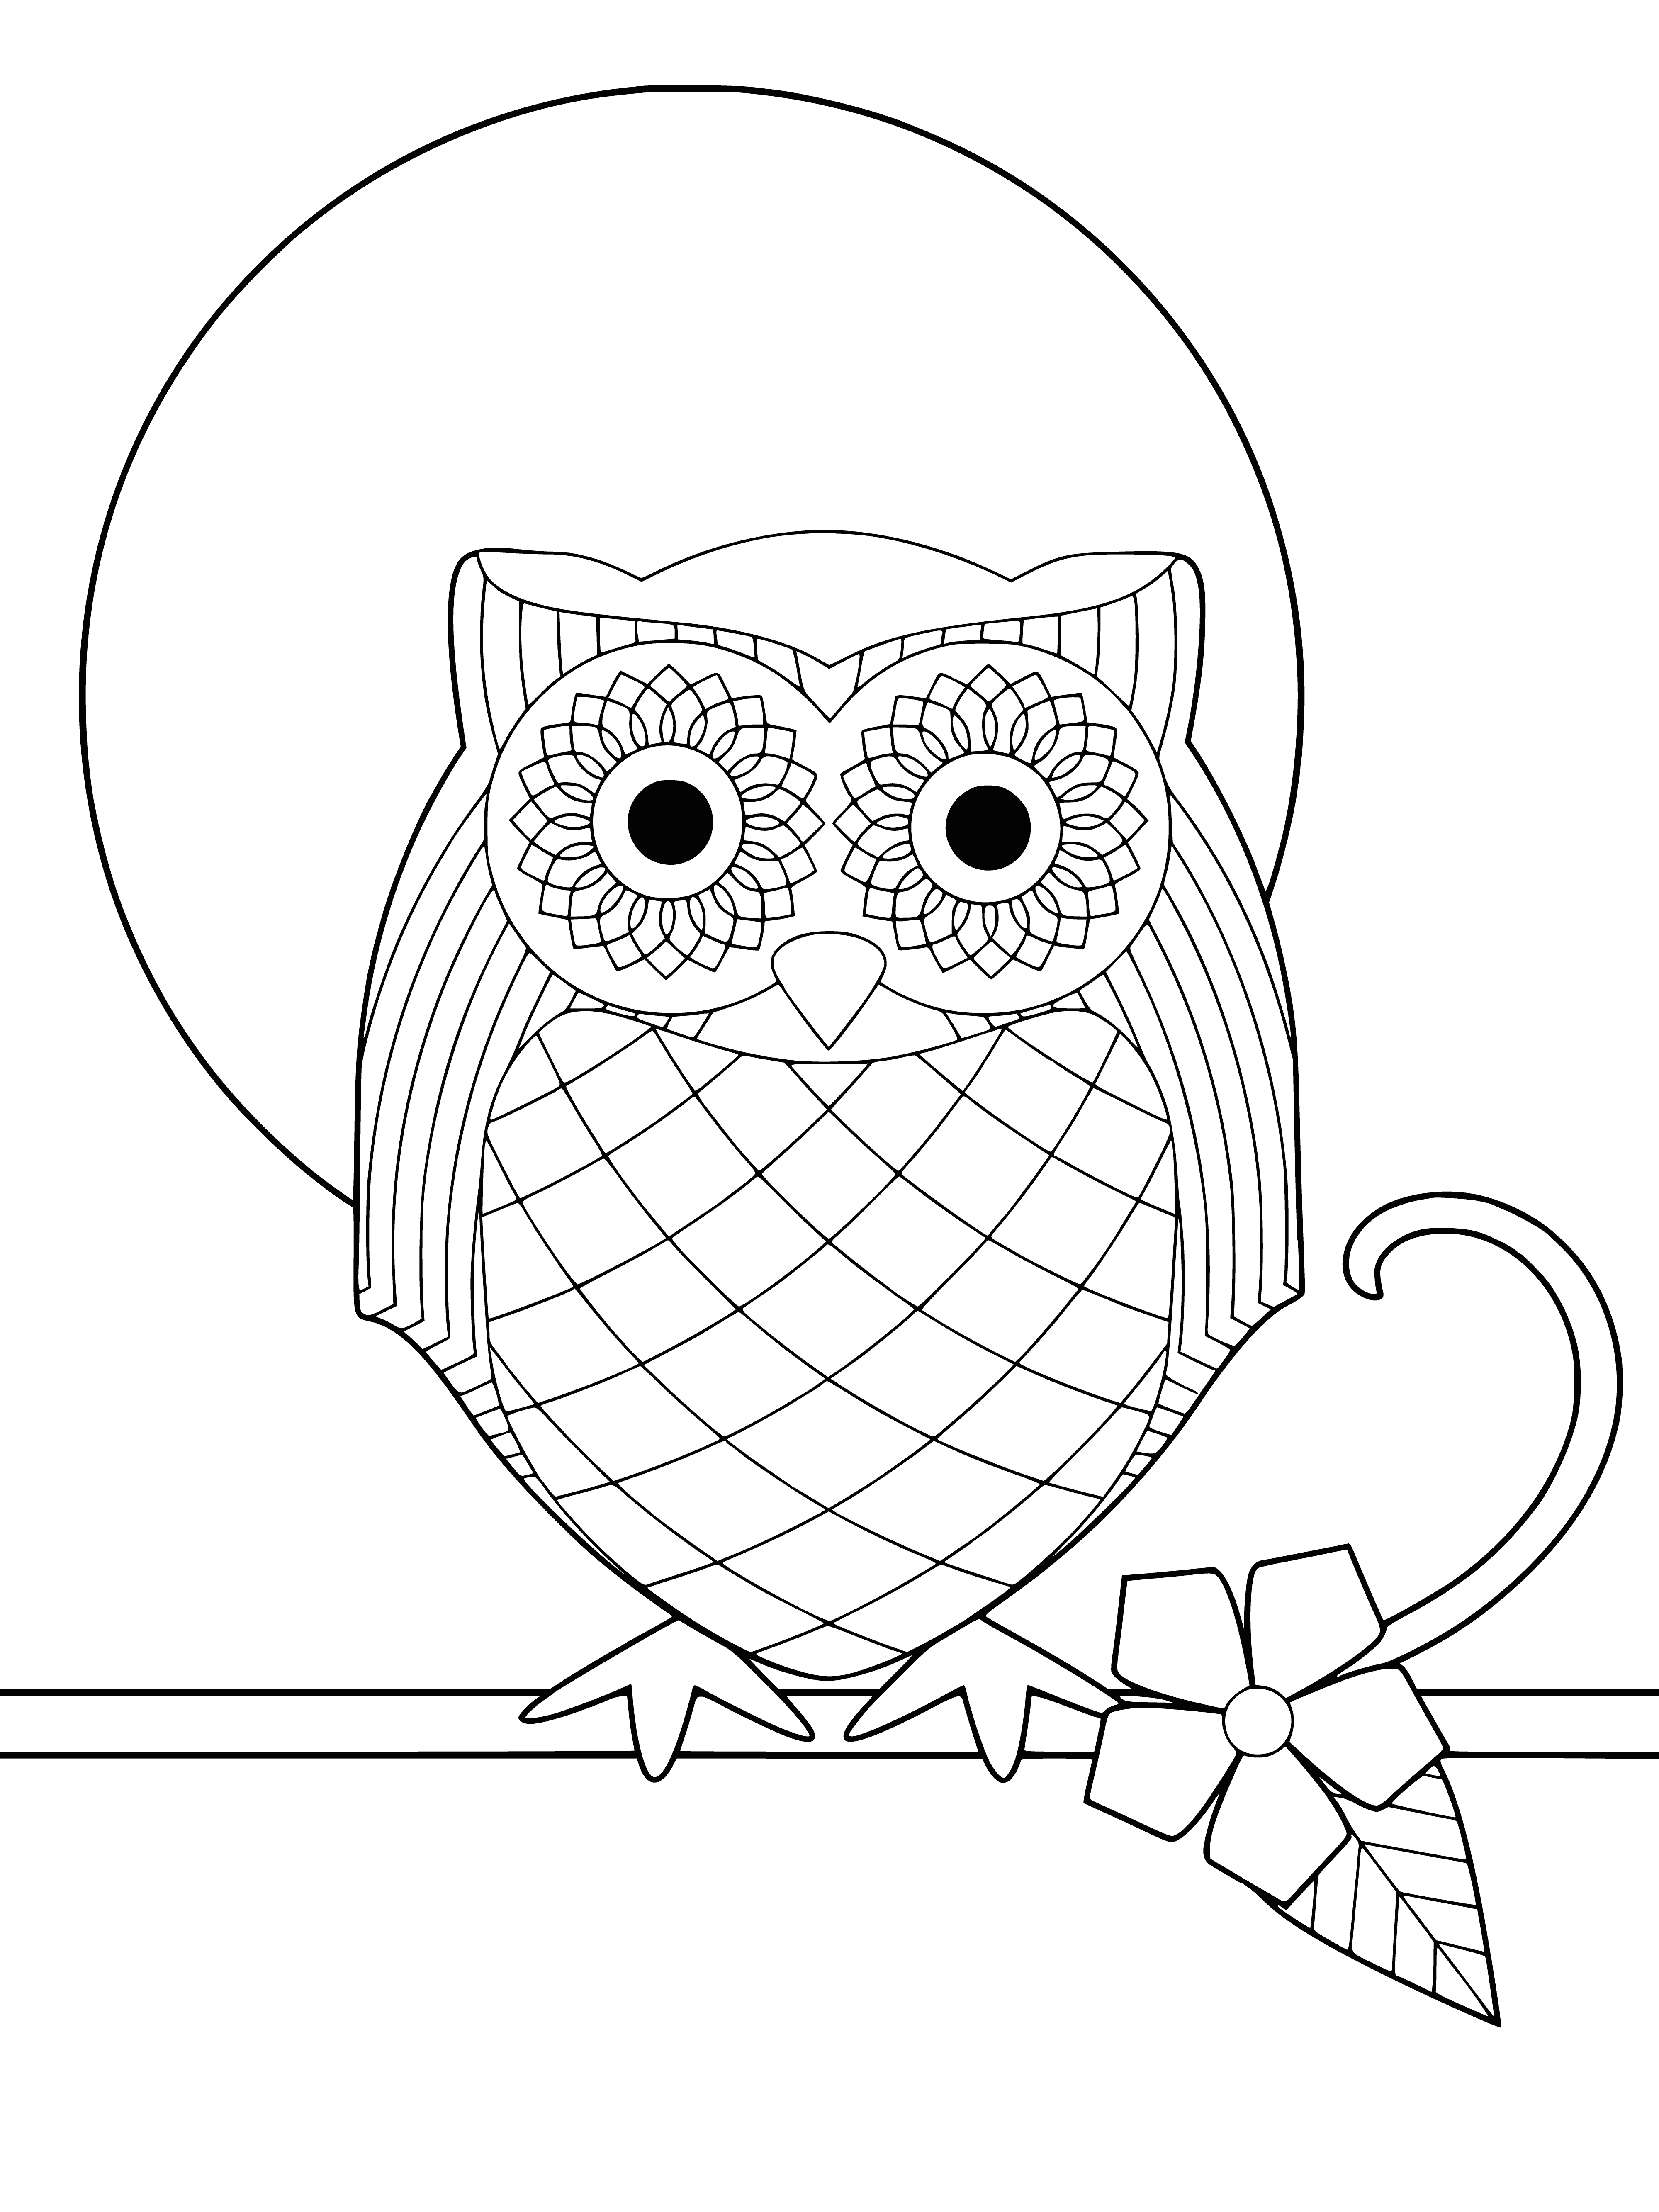 coloring page: Owl surrounded by flowers, leaves and swirls to color, with its eyes closed and head tilted up. #antistress #owls #coloring